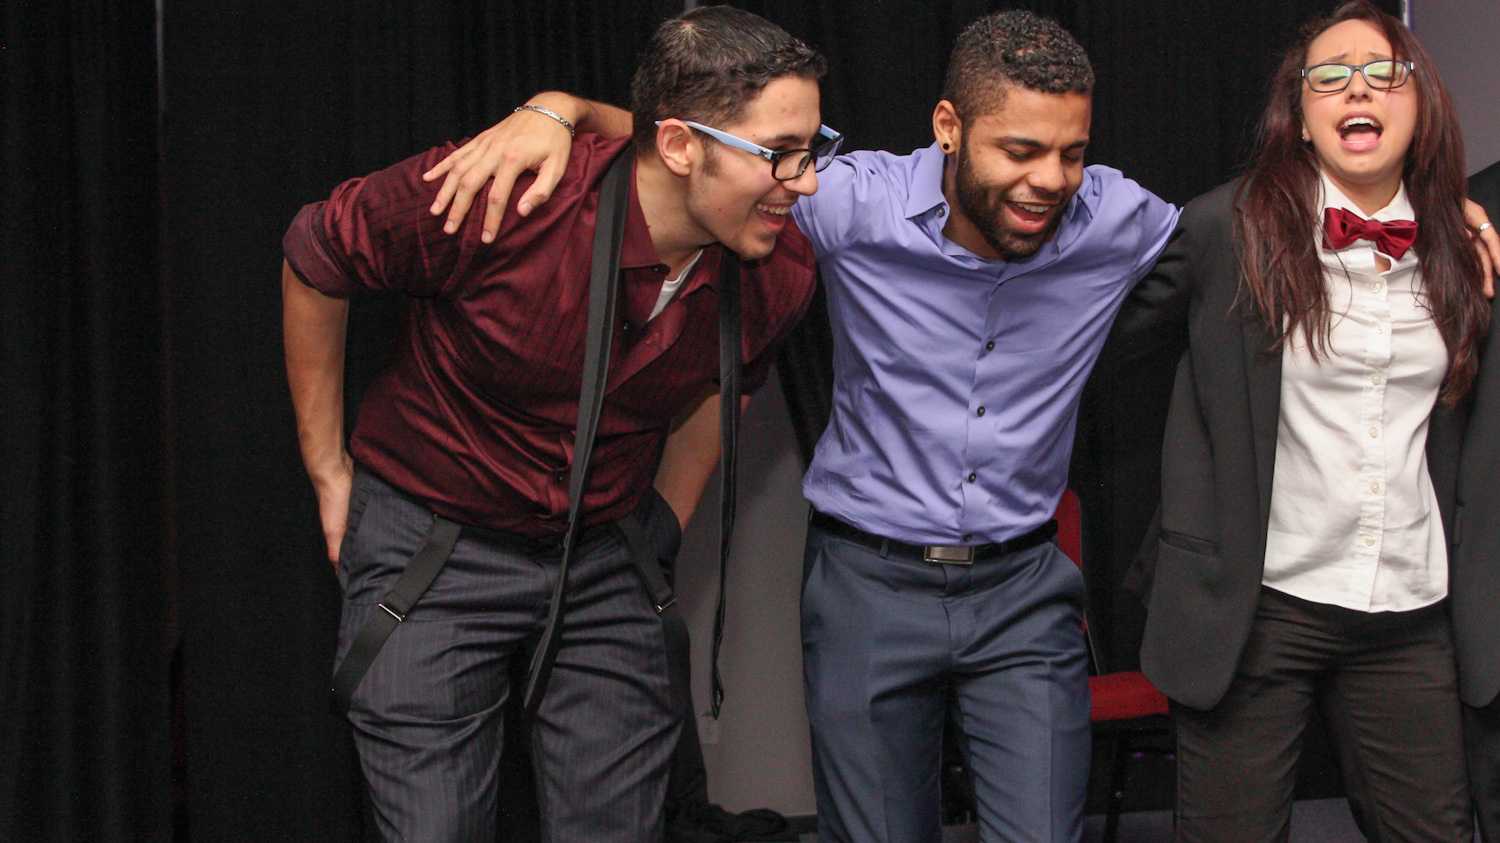 FAU students enjoying themselves at the LGBTQA Gala that took place on Friday Jan. 30th.